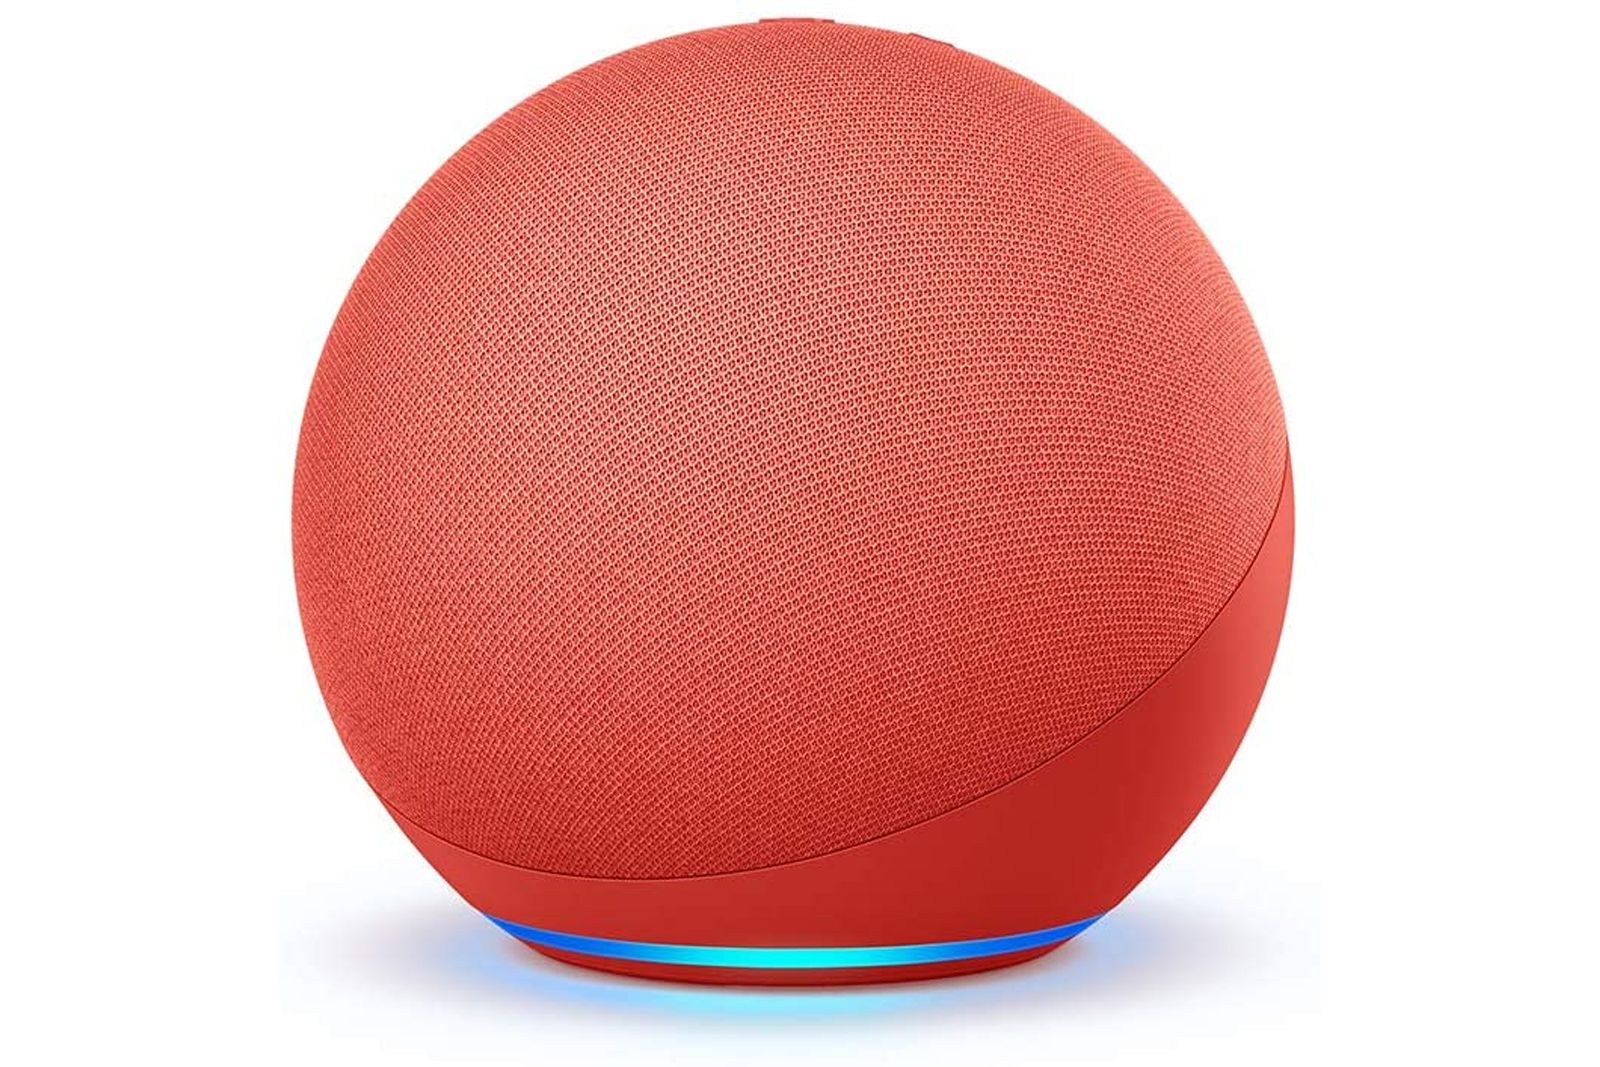 Amazon just revealed a Product Red Echo smart speaker photo 1